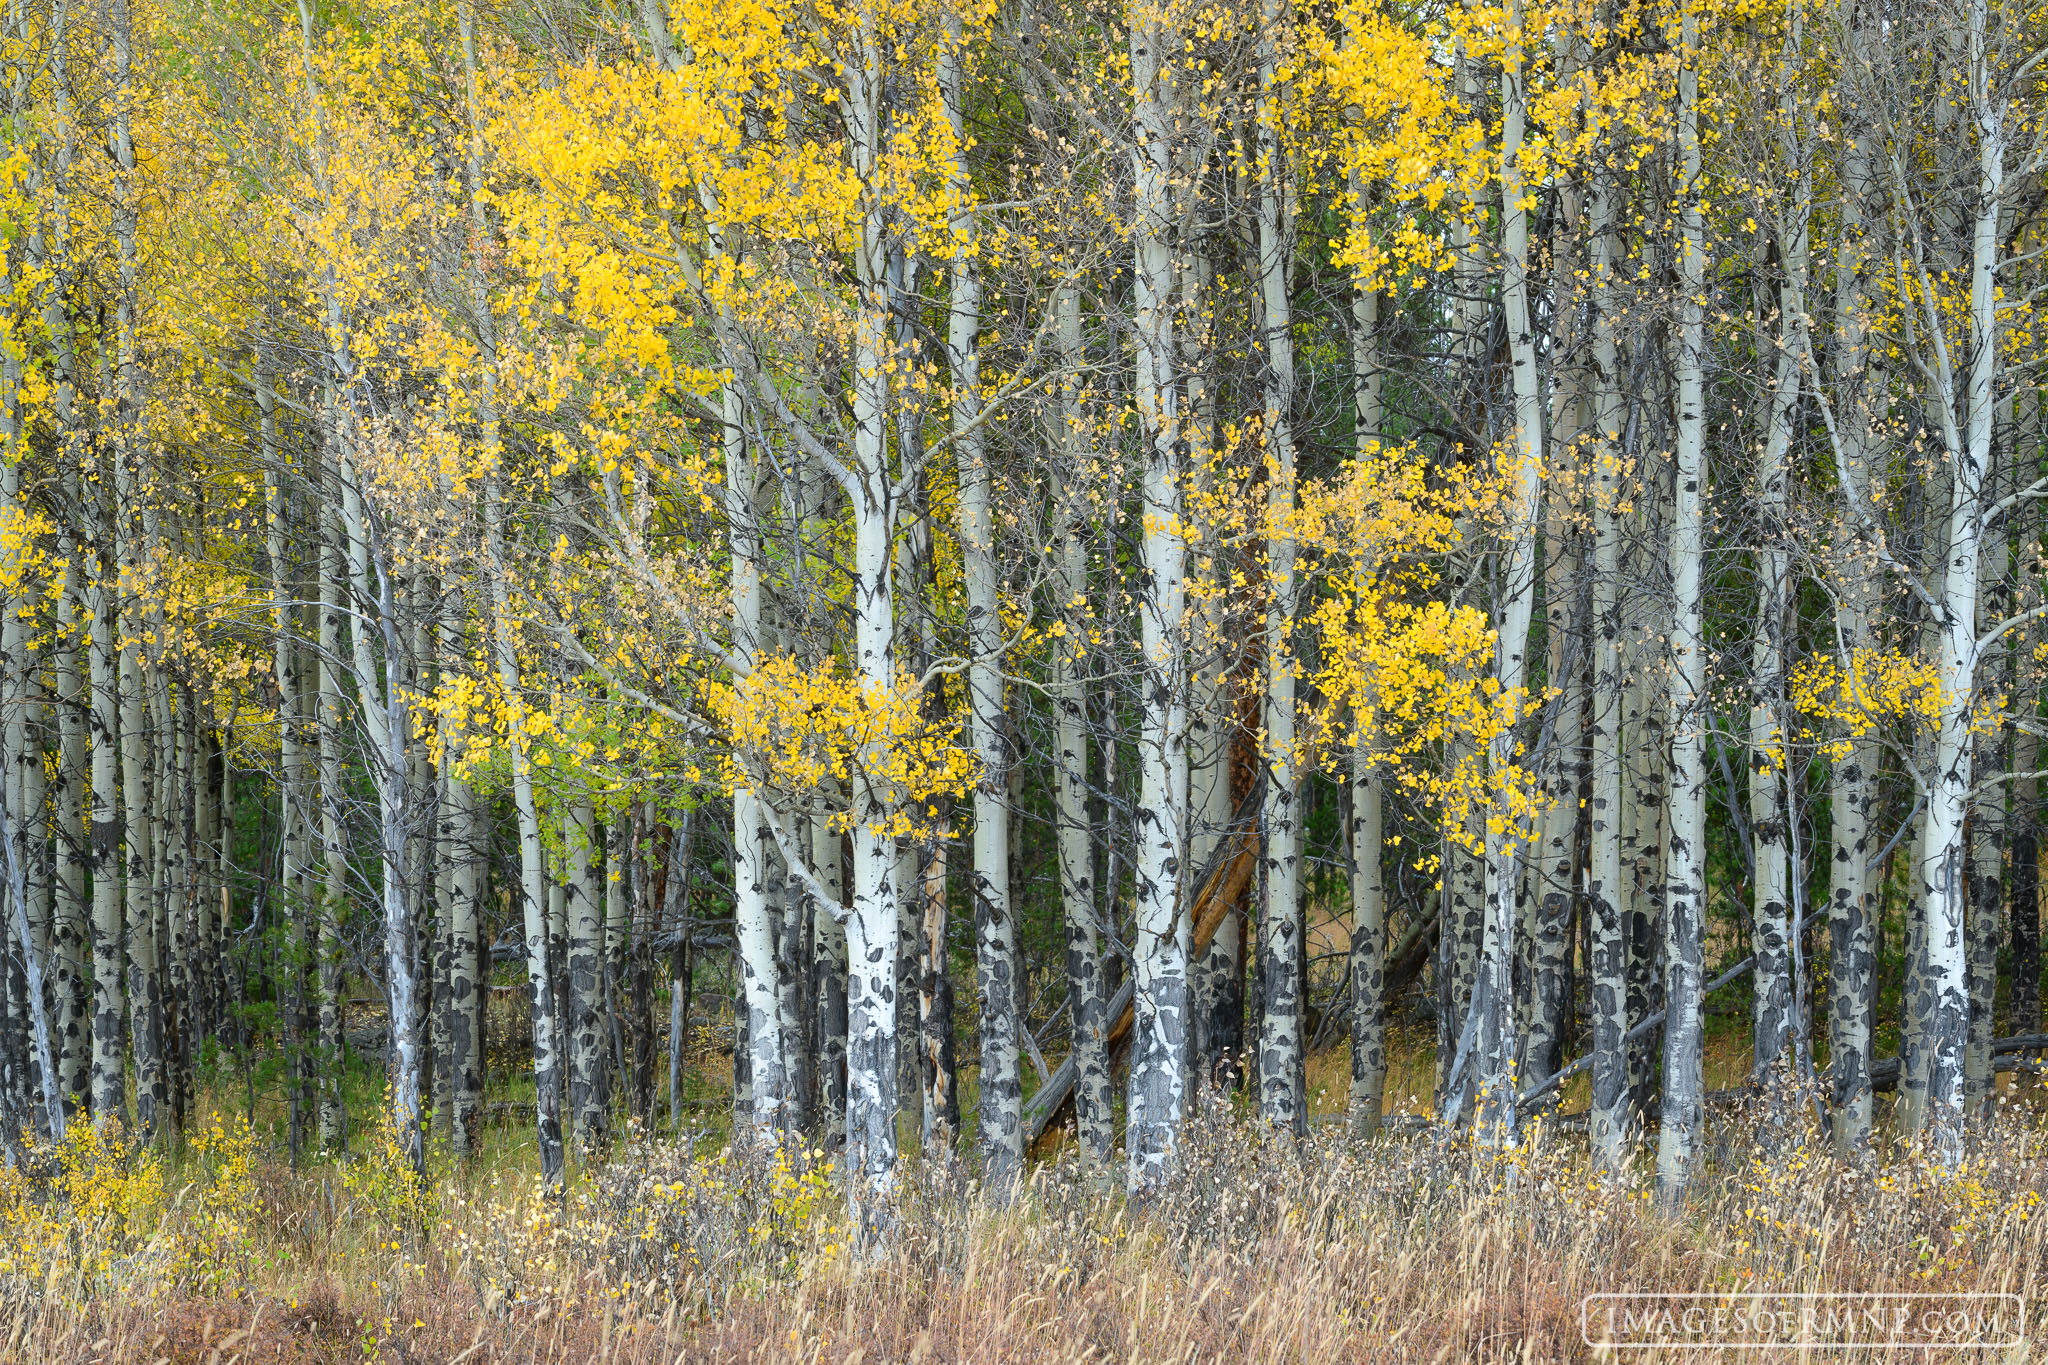 This year the first aspen of the season were found near the west entrance to Rocky Mountain National Park. They stood so proudly...